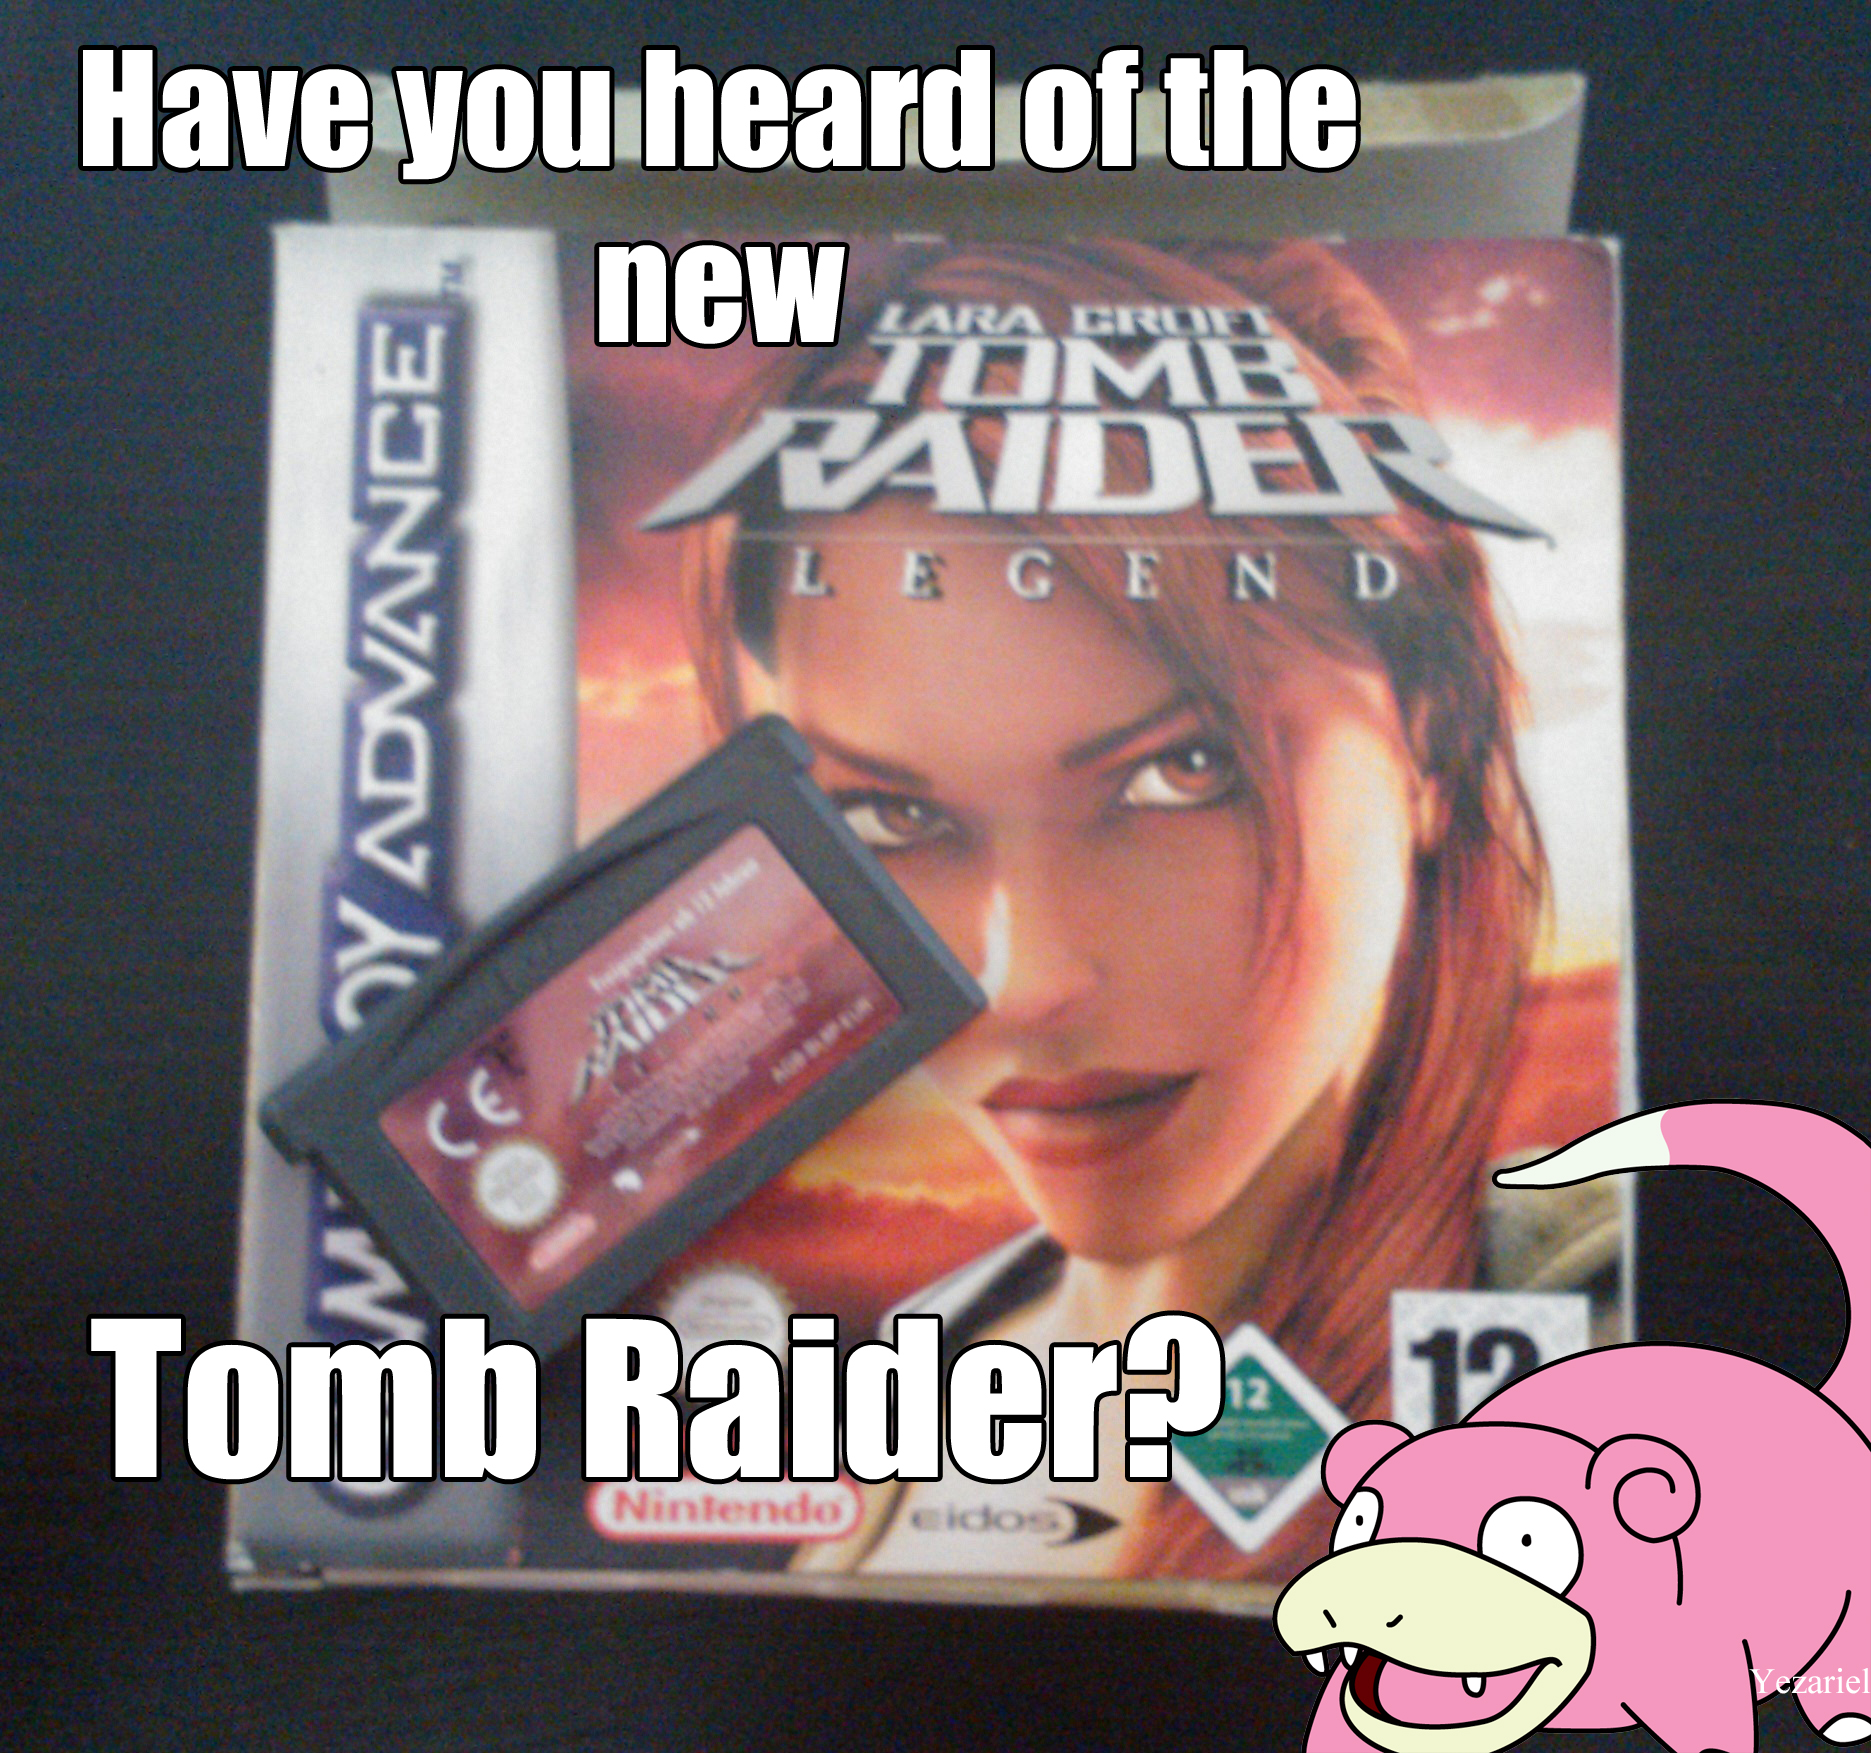 The new Tomb Raider is out!